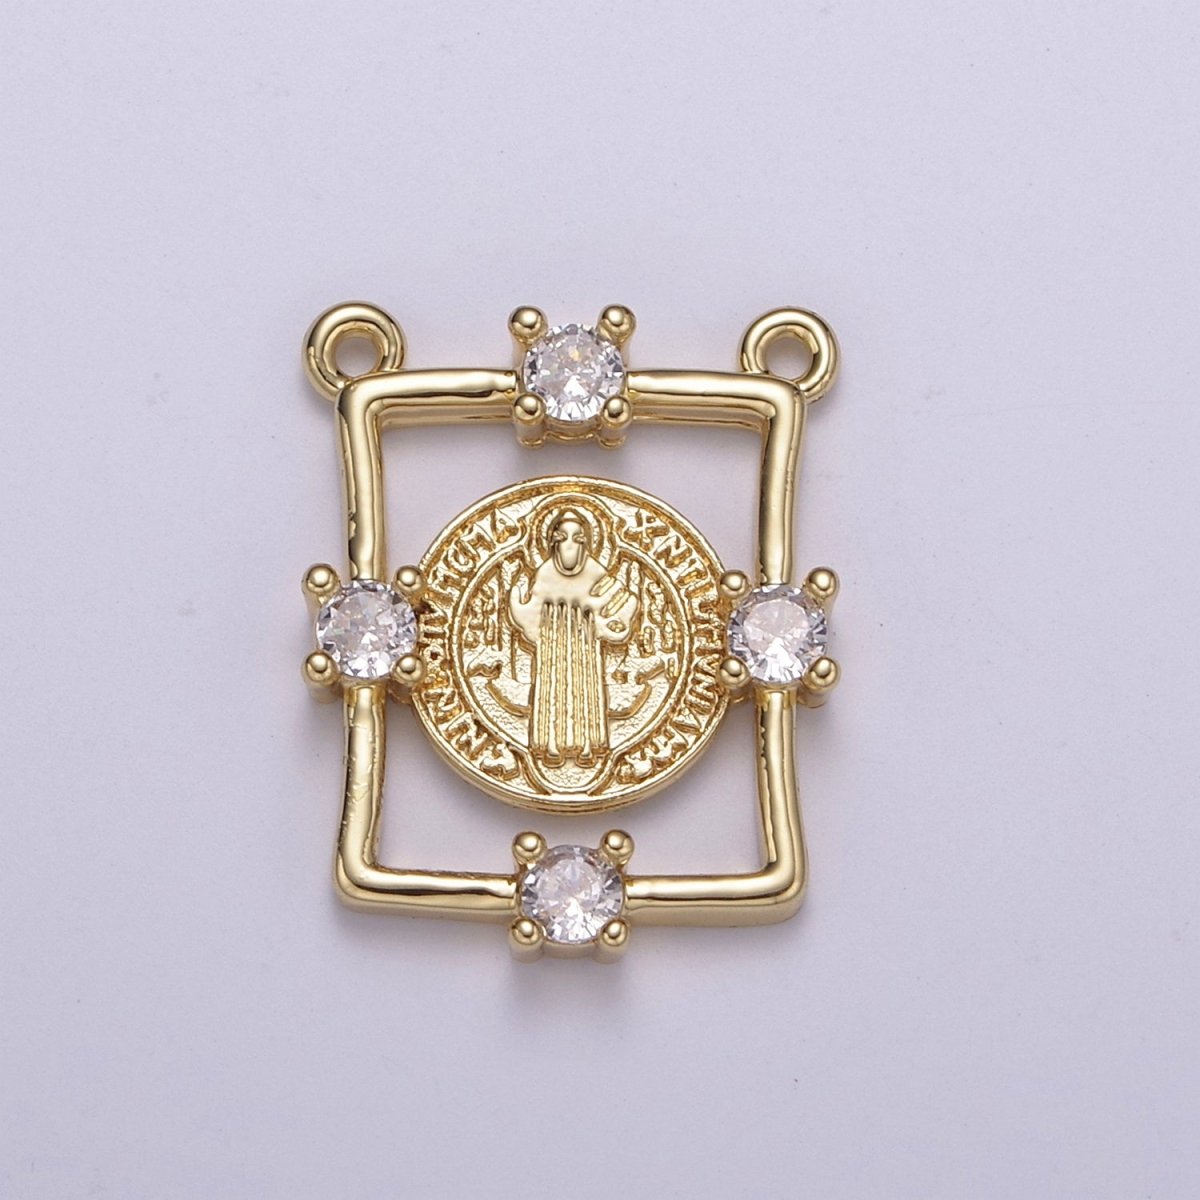 Gold Saint St Benedict, Lady Guadalupe Medallion Protection Square Charms Connector Necklace Pendant, Religious Necklace Charms, 20.6*16mm N-109 - N-111 - DLUXCA